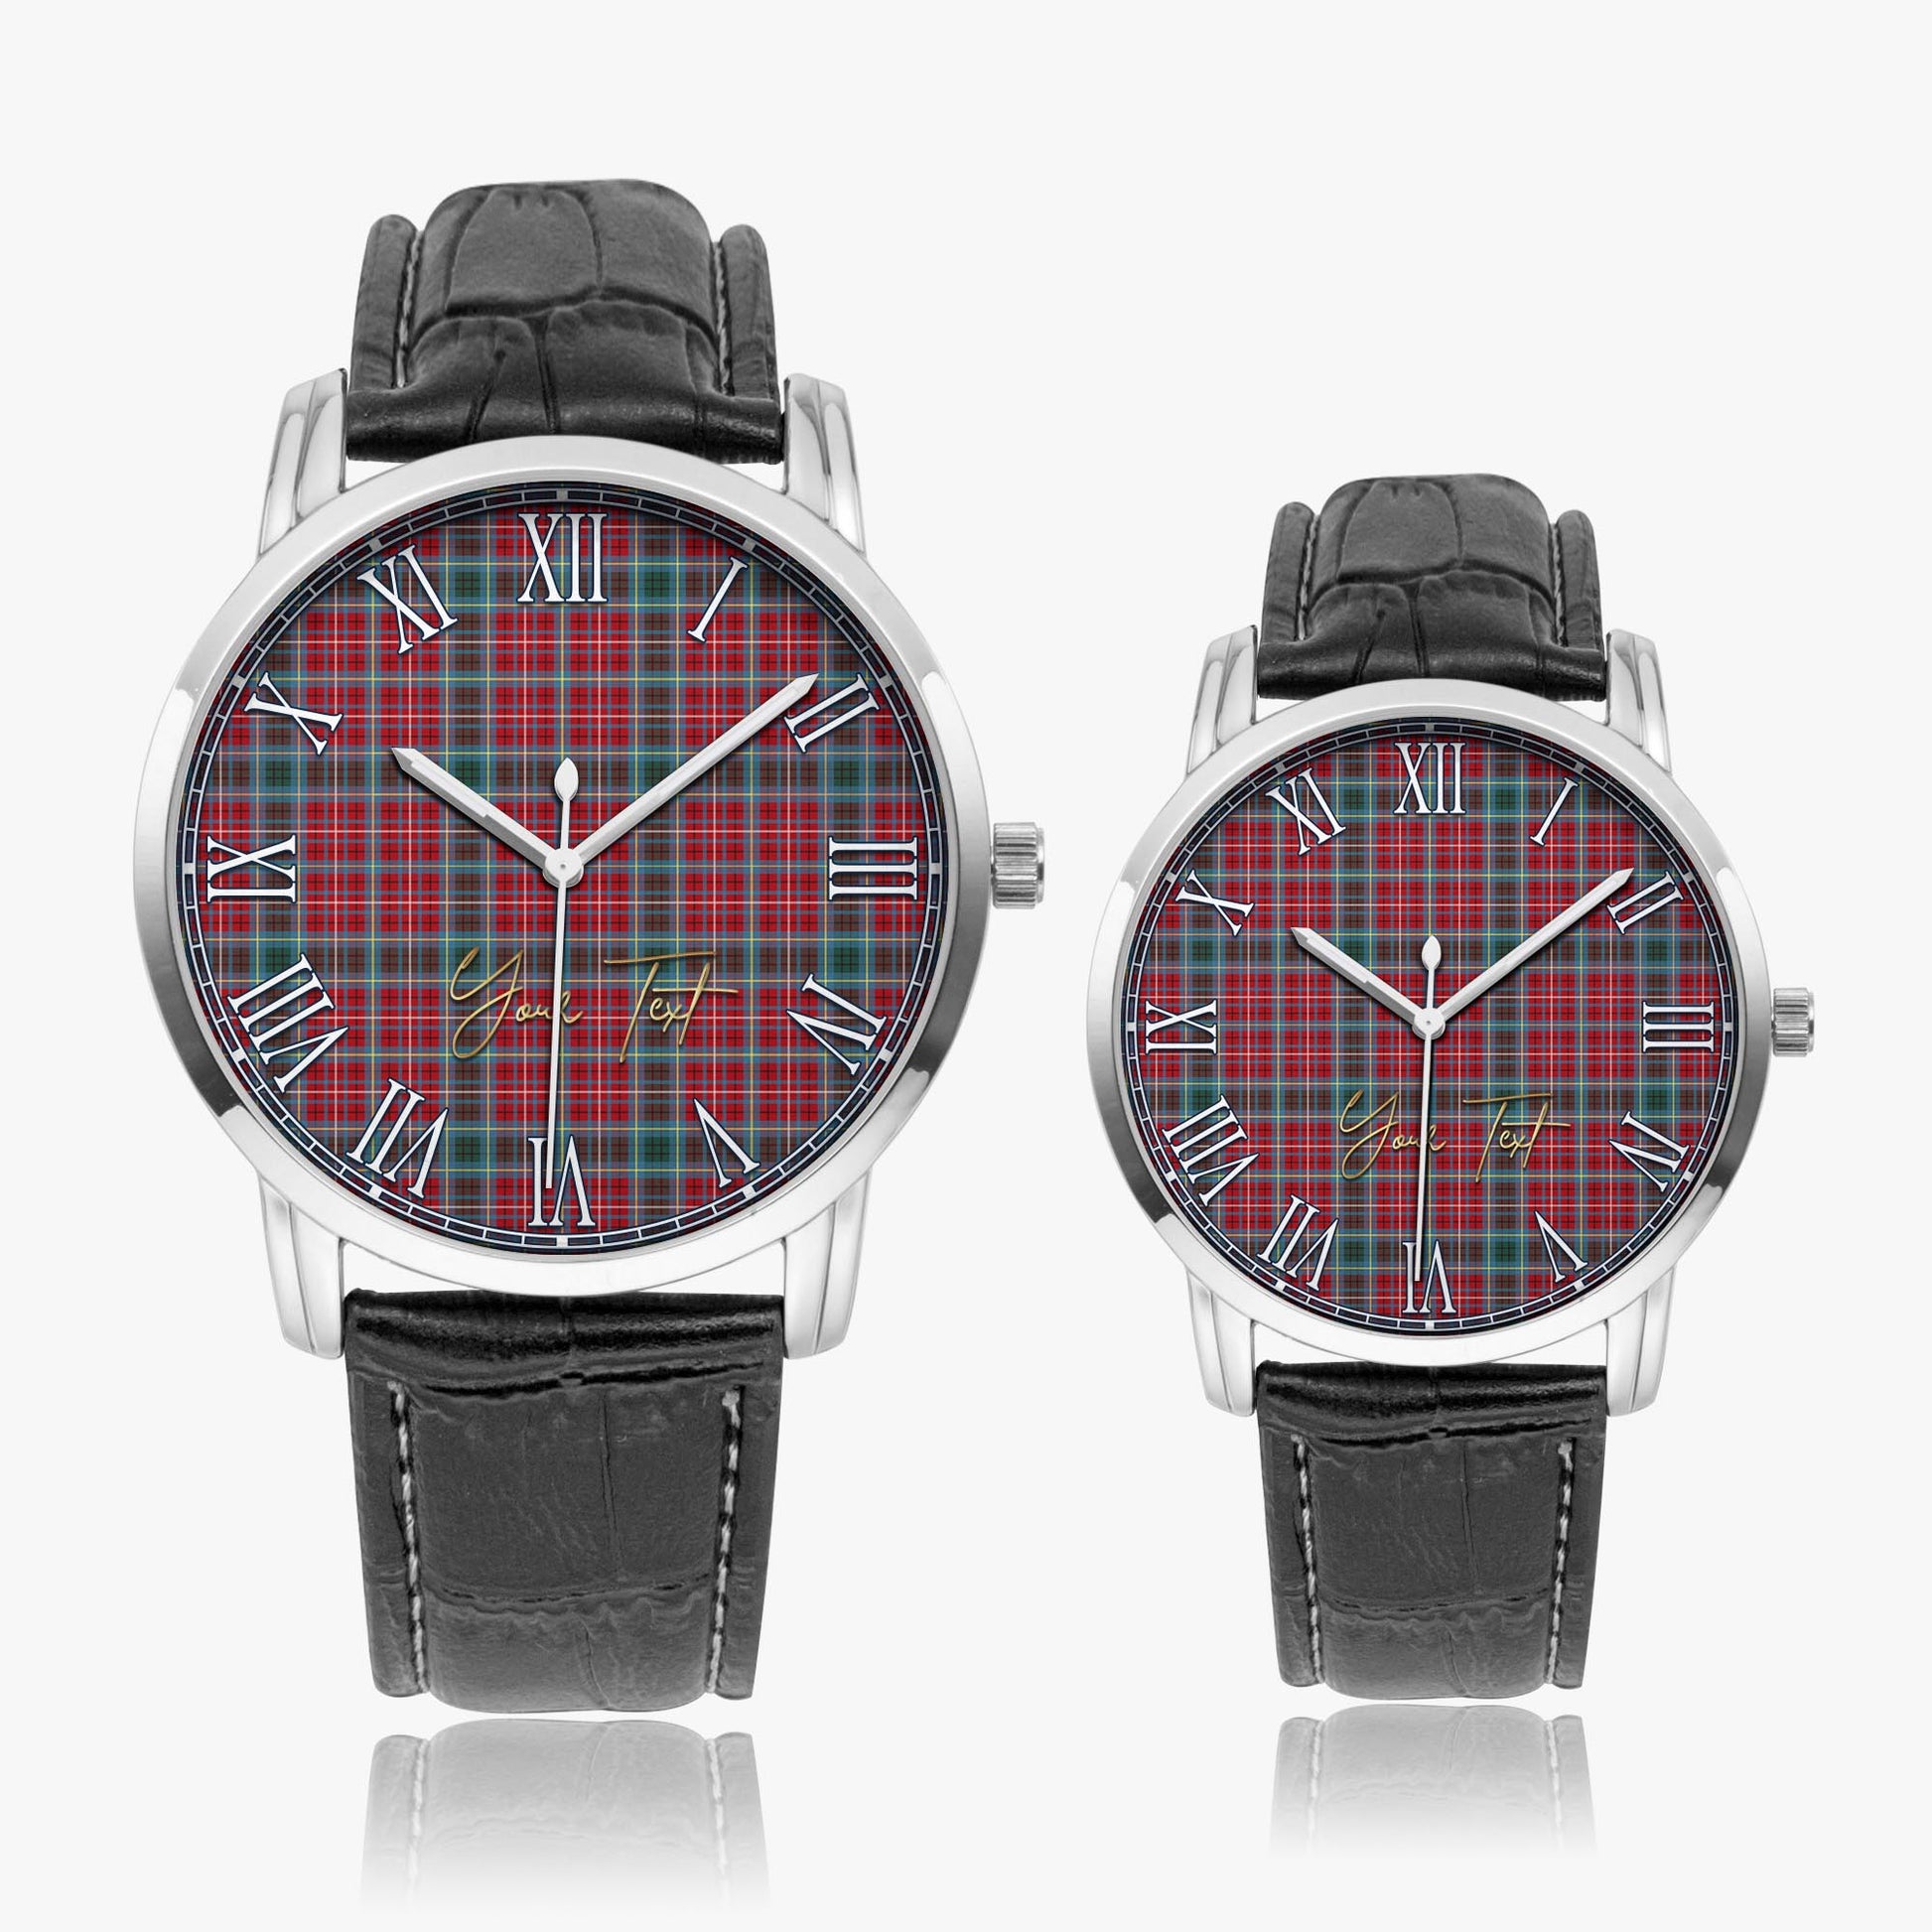 British Columbia Province Canada Tartan Personalized Your Text Leather Trap Quartz Watch Wide Type Silver Case With Black Leather Strap - Tartanvibesclothing